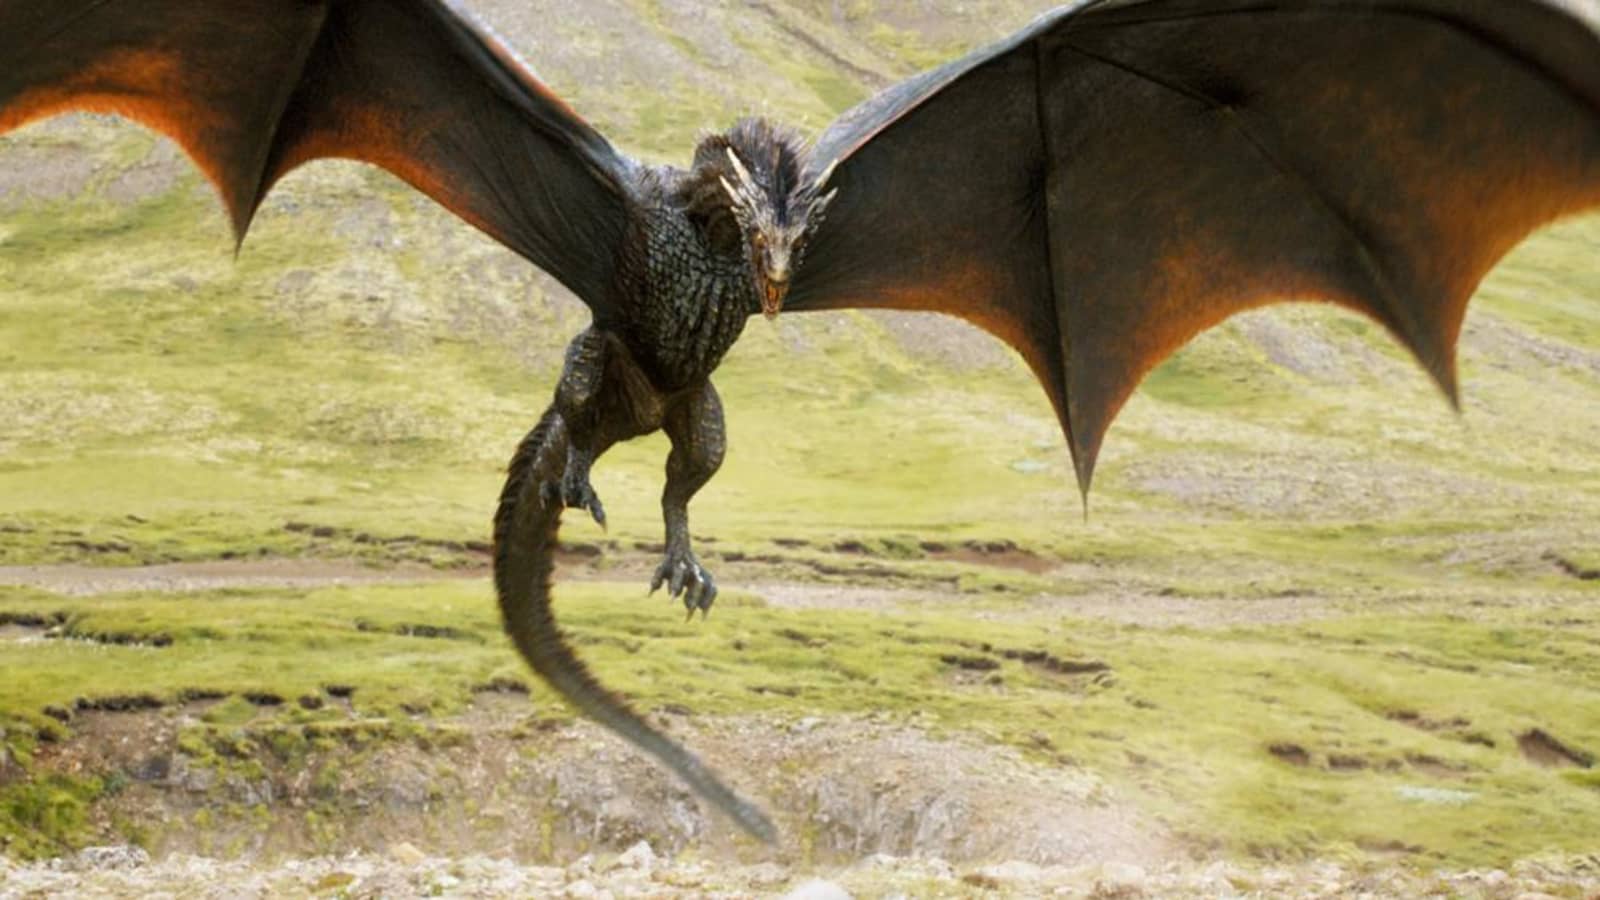 Could the 'Game of Thrones' Dragons Fly and Breathe Fire?